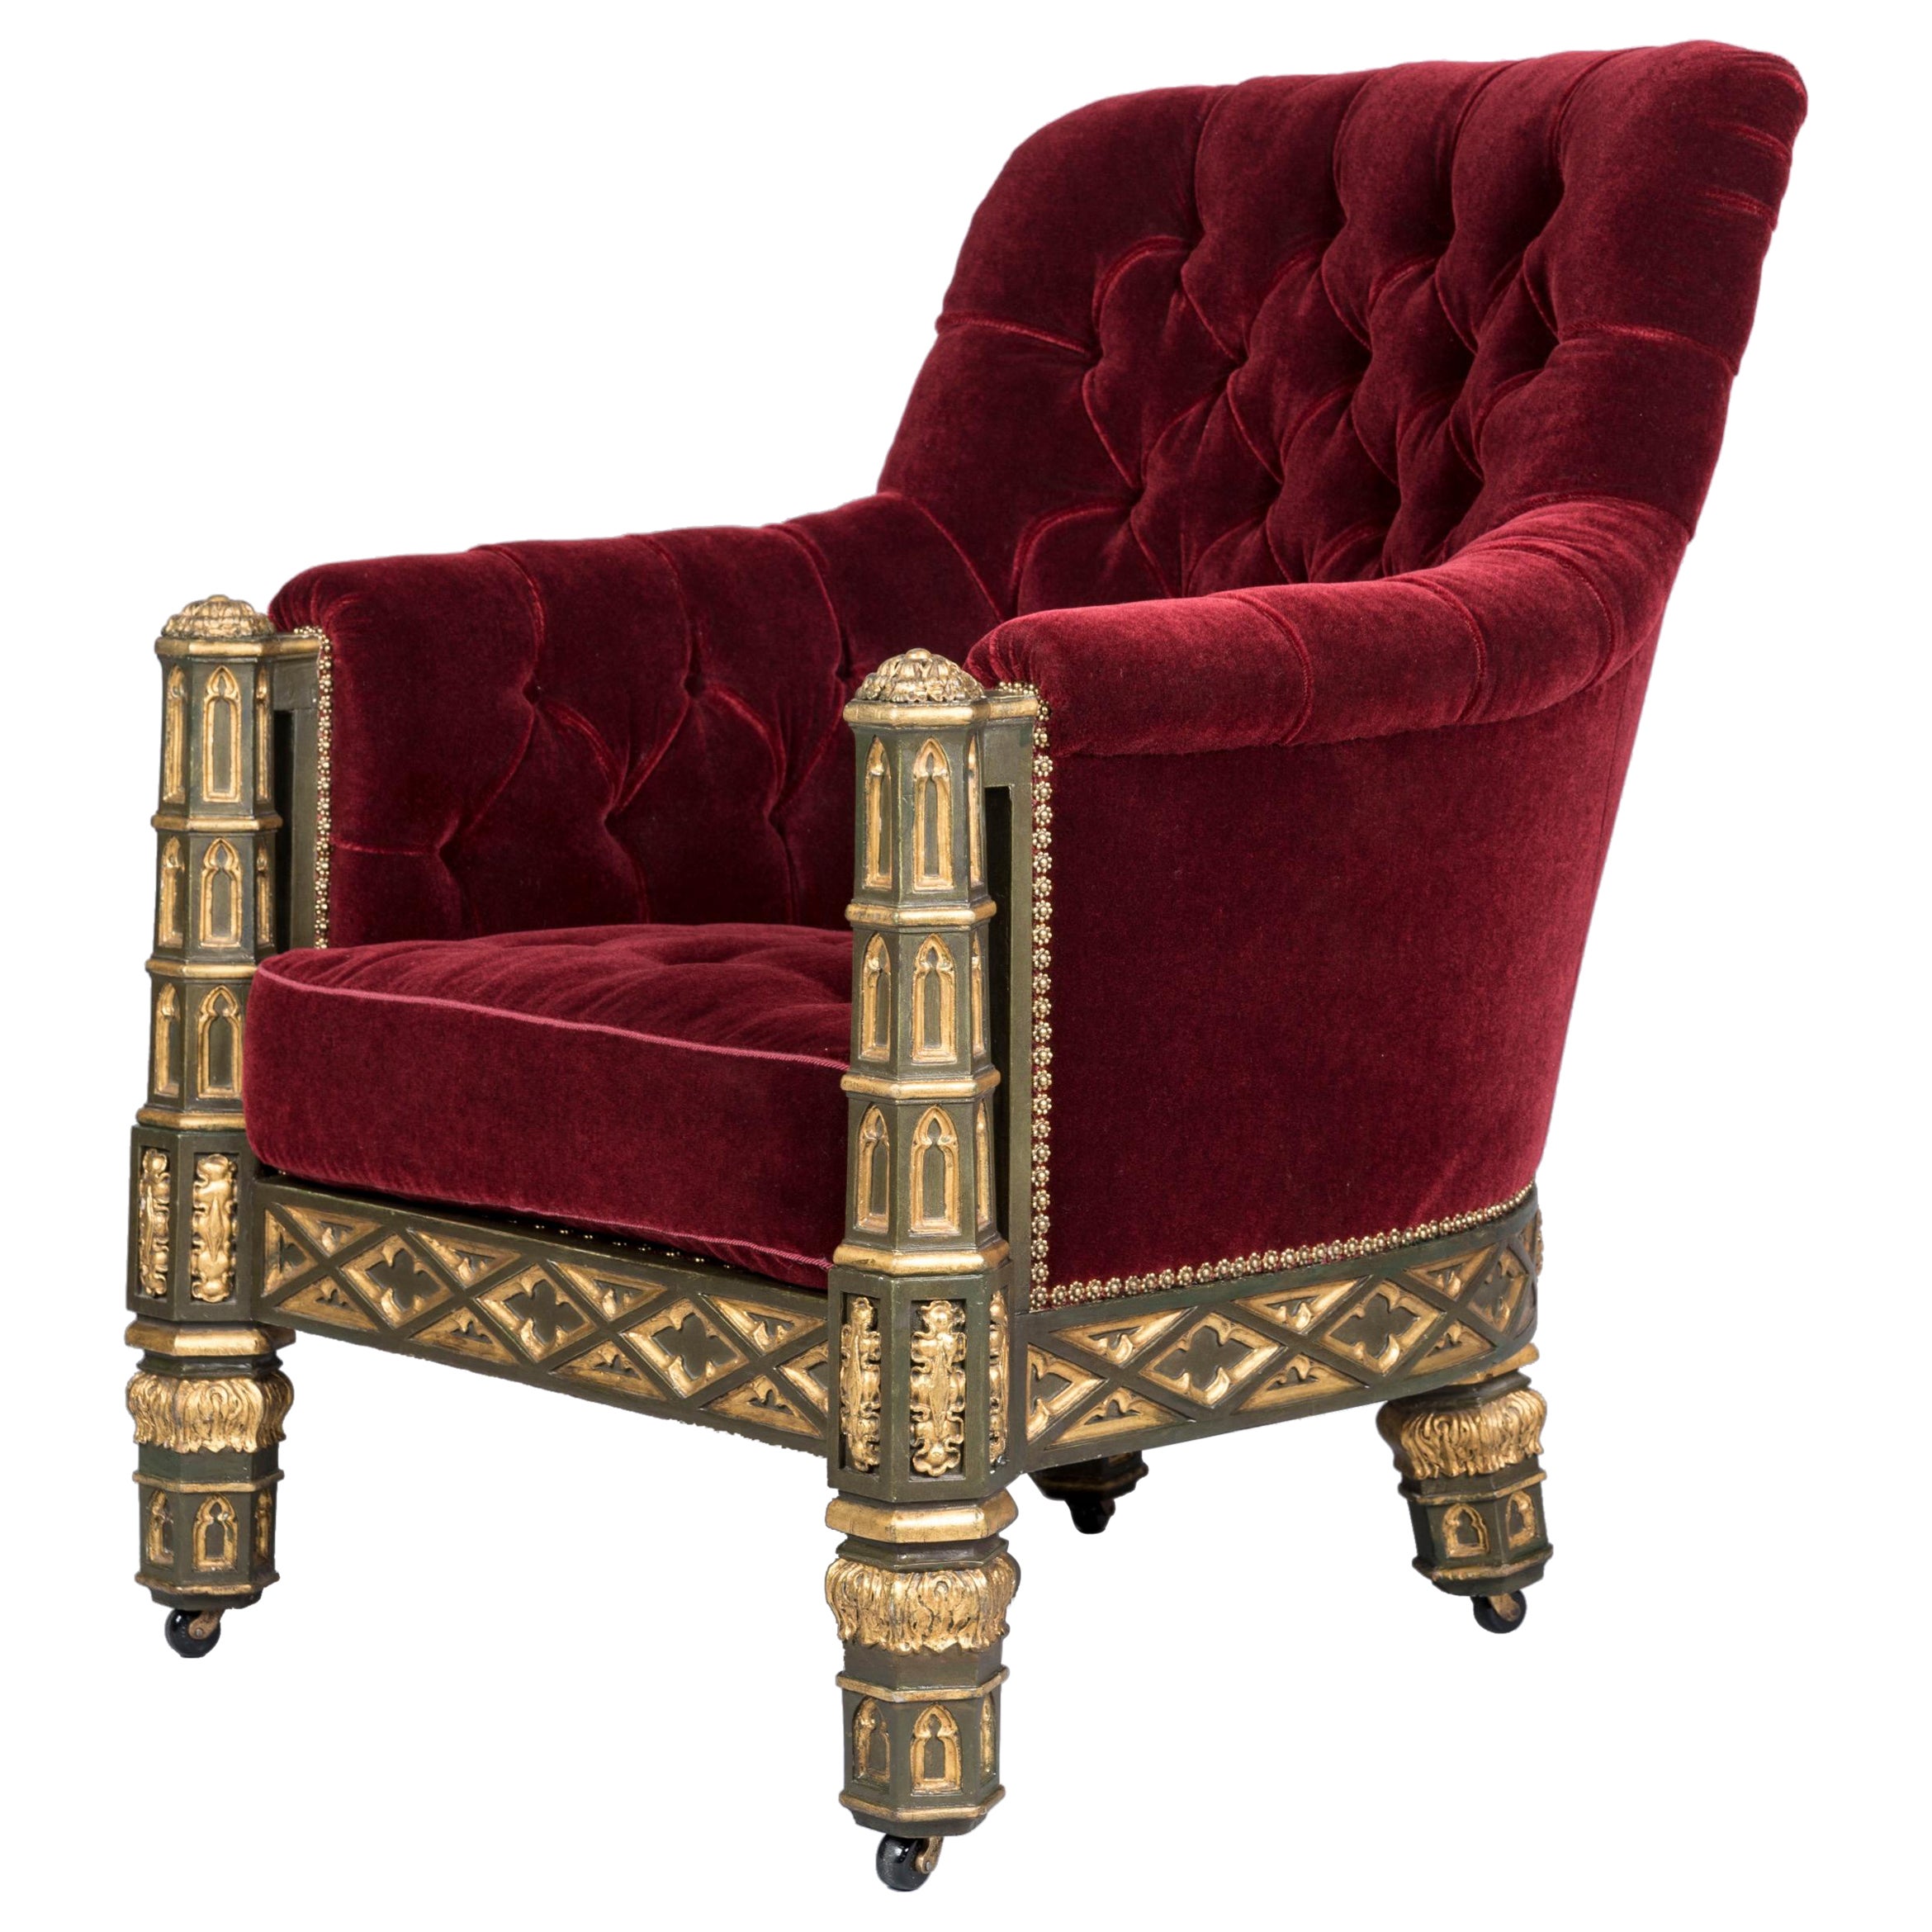 Rare 19th Century Gothic Revival Armchair from Eaton Hall by Gillows For Sale